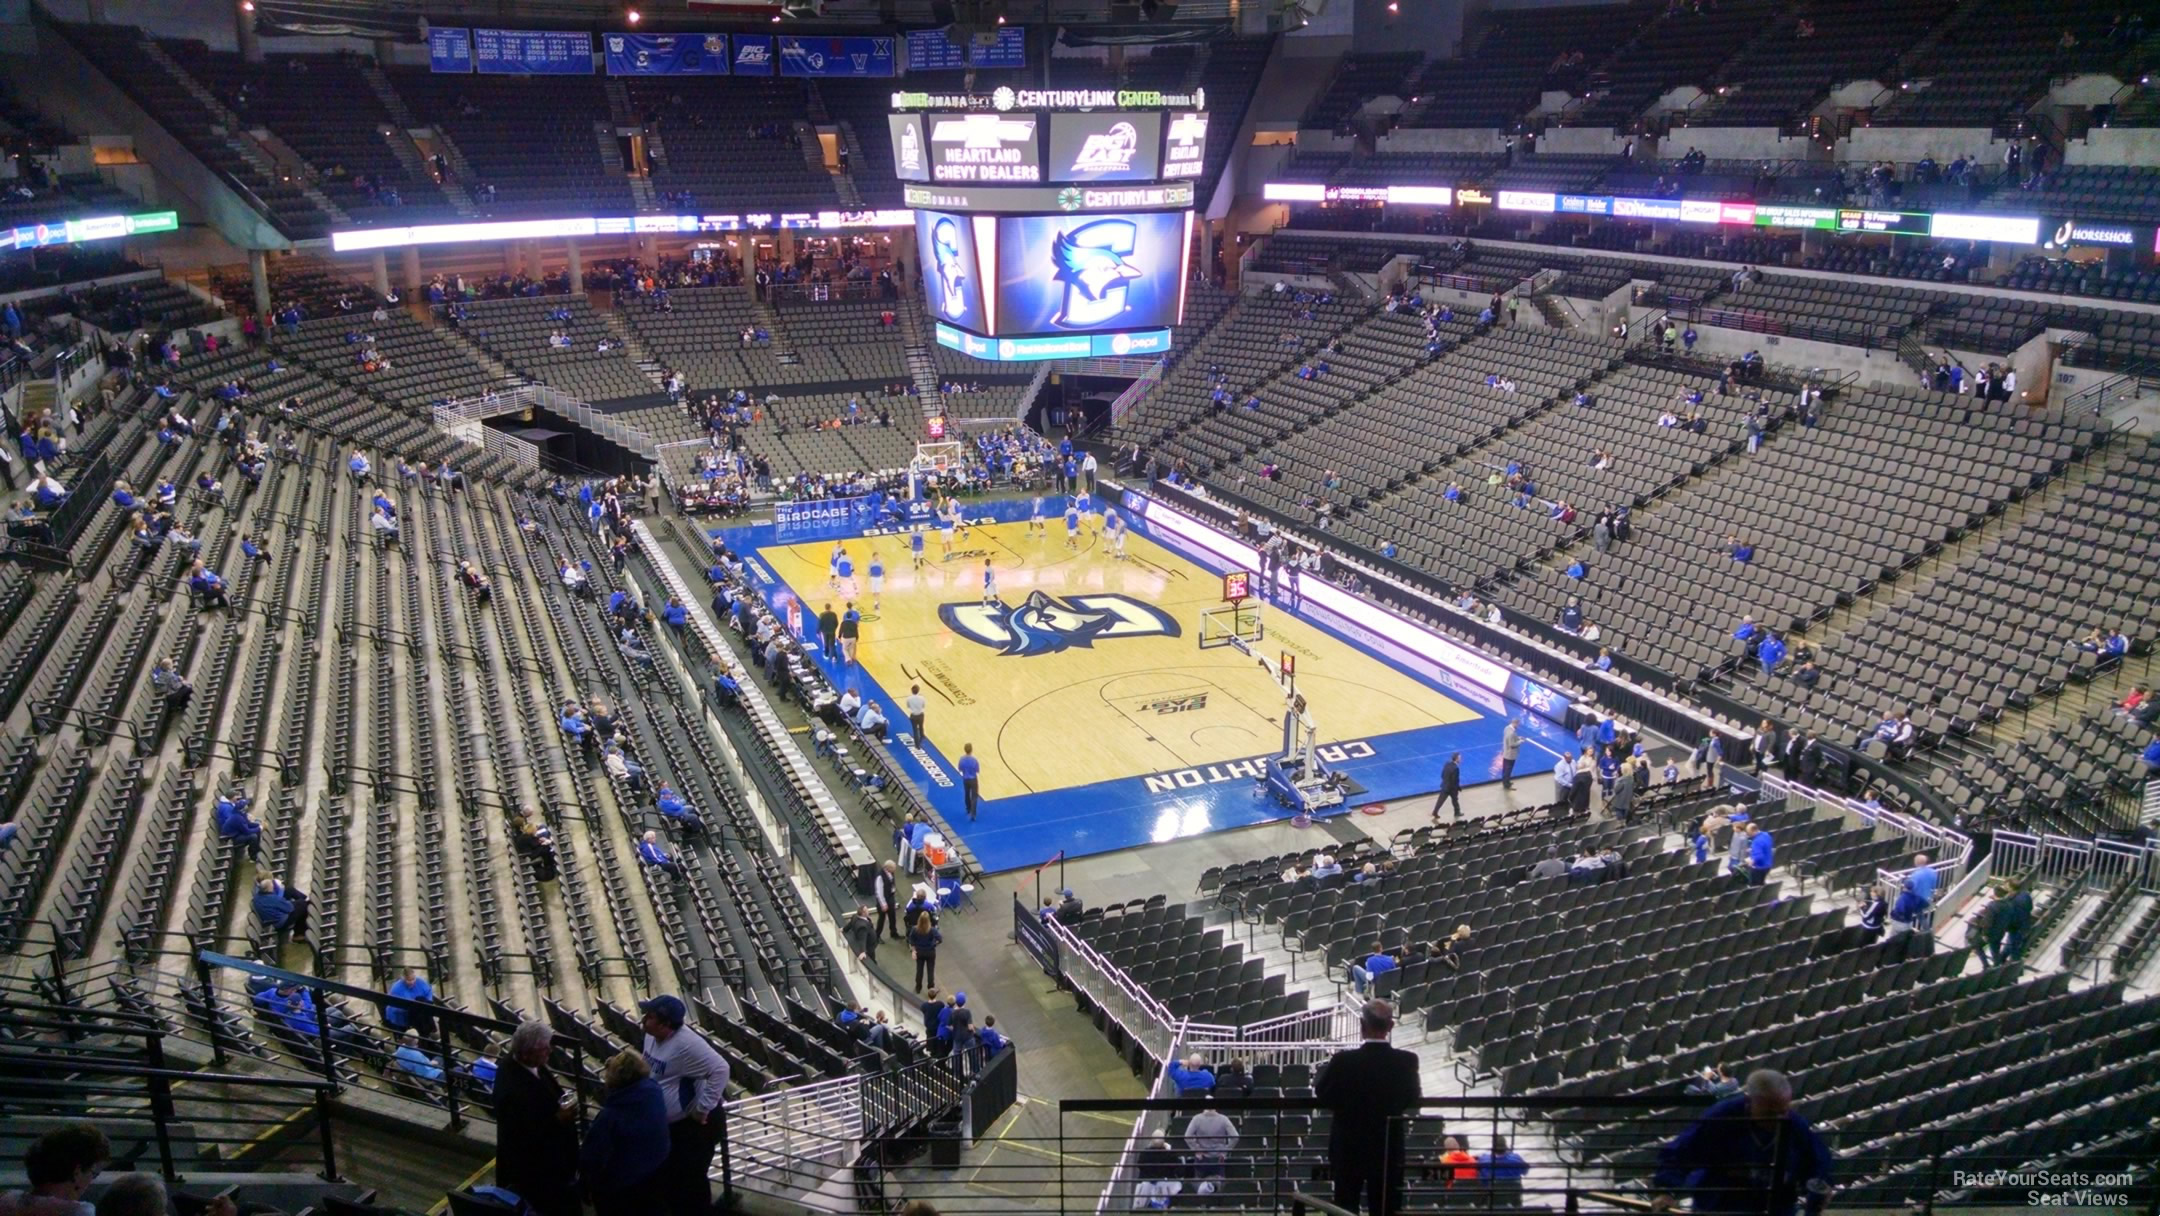 section 215, row l seat view  for basketball - chi health center omaha